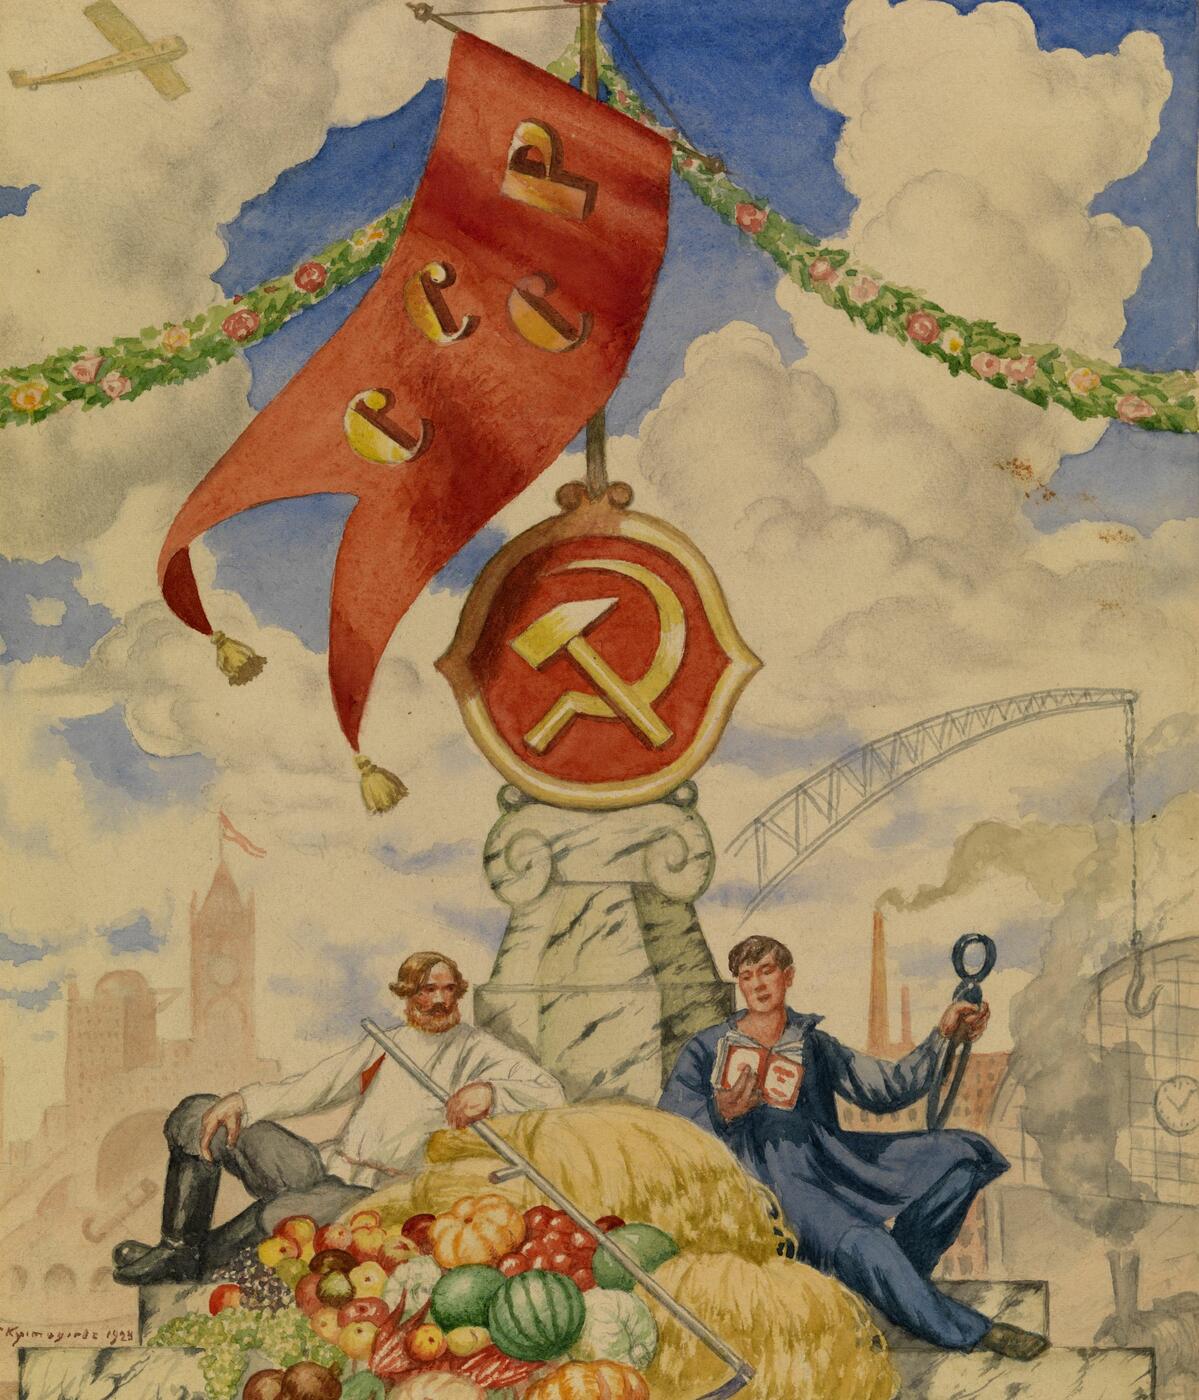 Worker and Farmer. Cover Design for the Anniversary Issue of the Magazine "Petrograd"